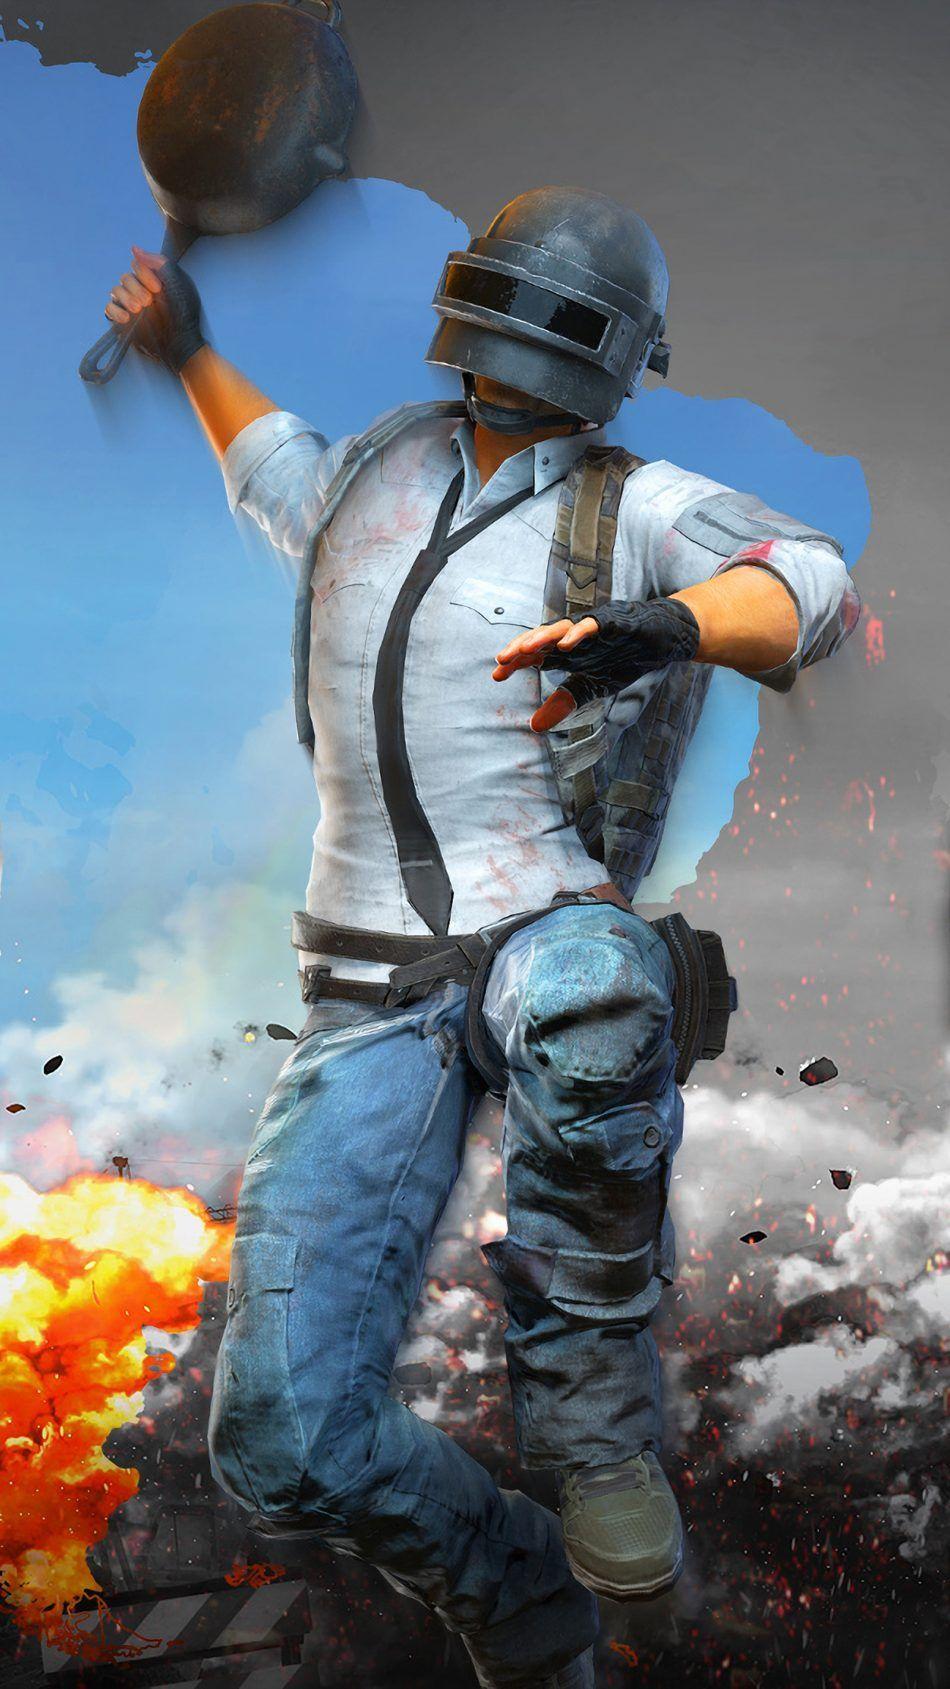 PUBG Helmet Guy Attacking With Pan. Mobile legend wallpaper